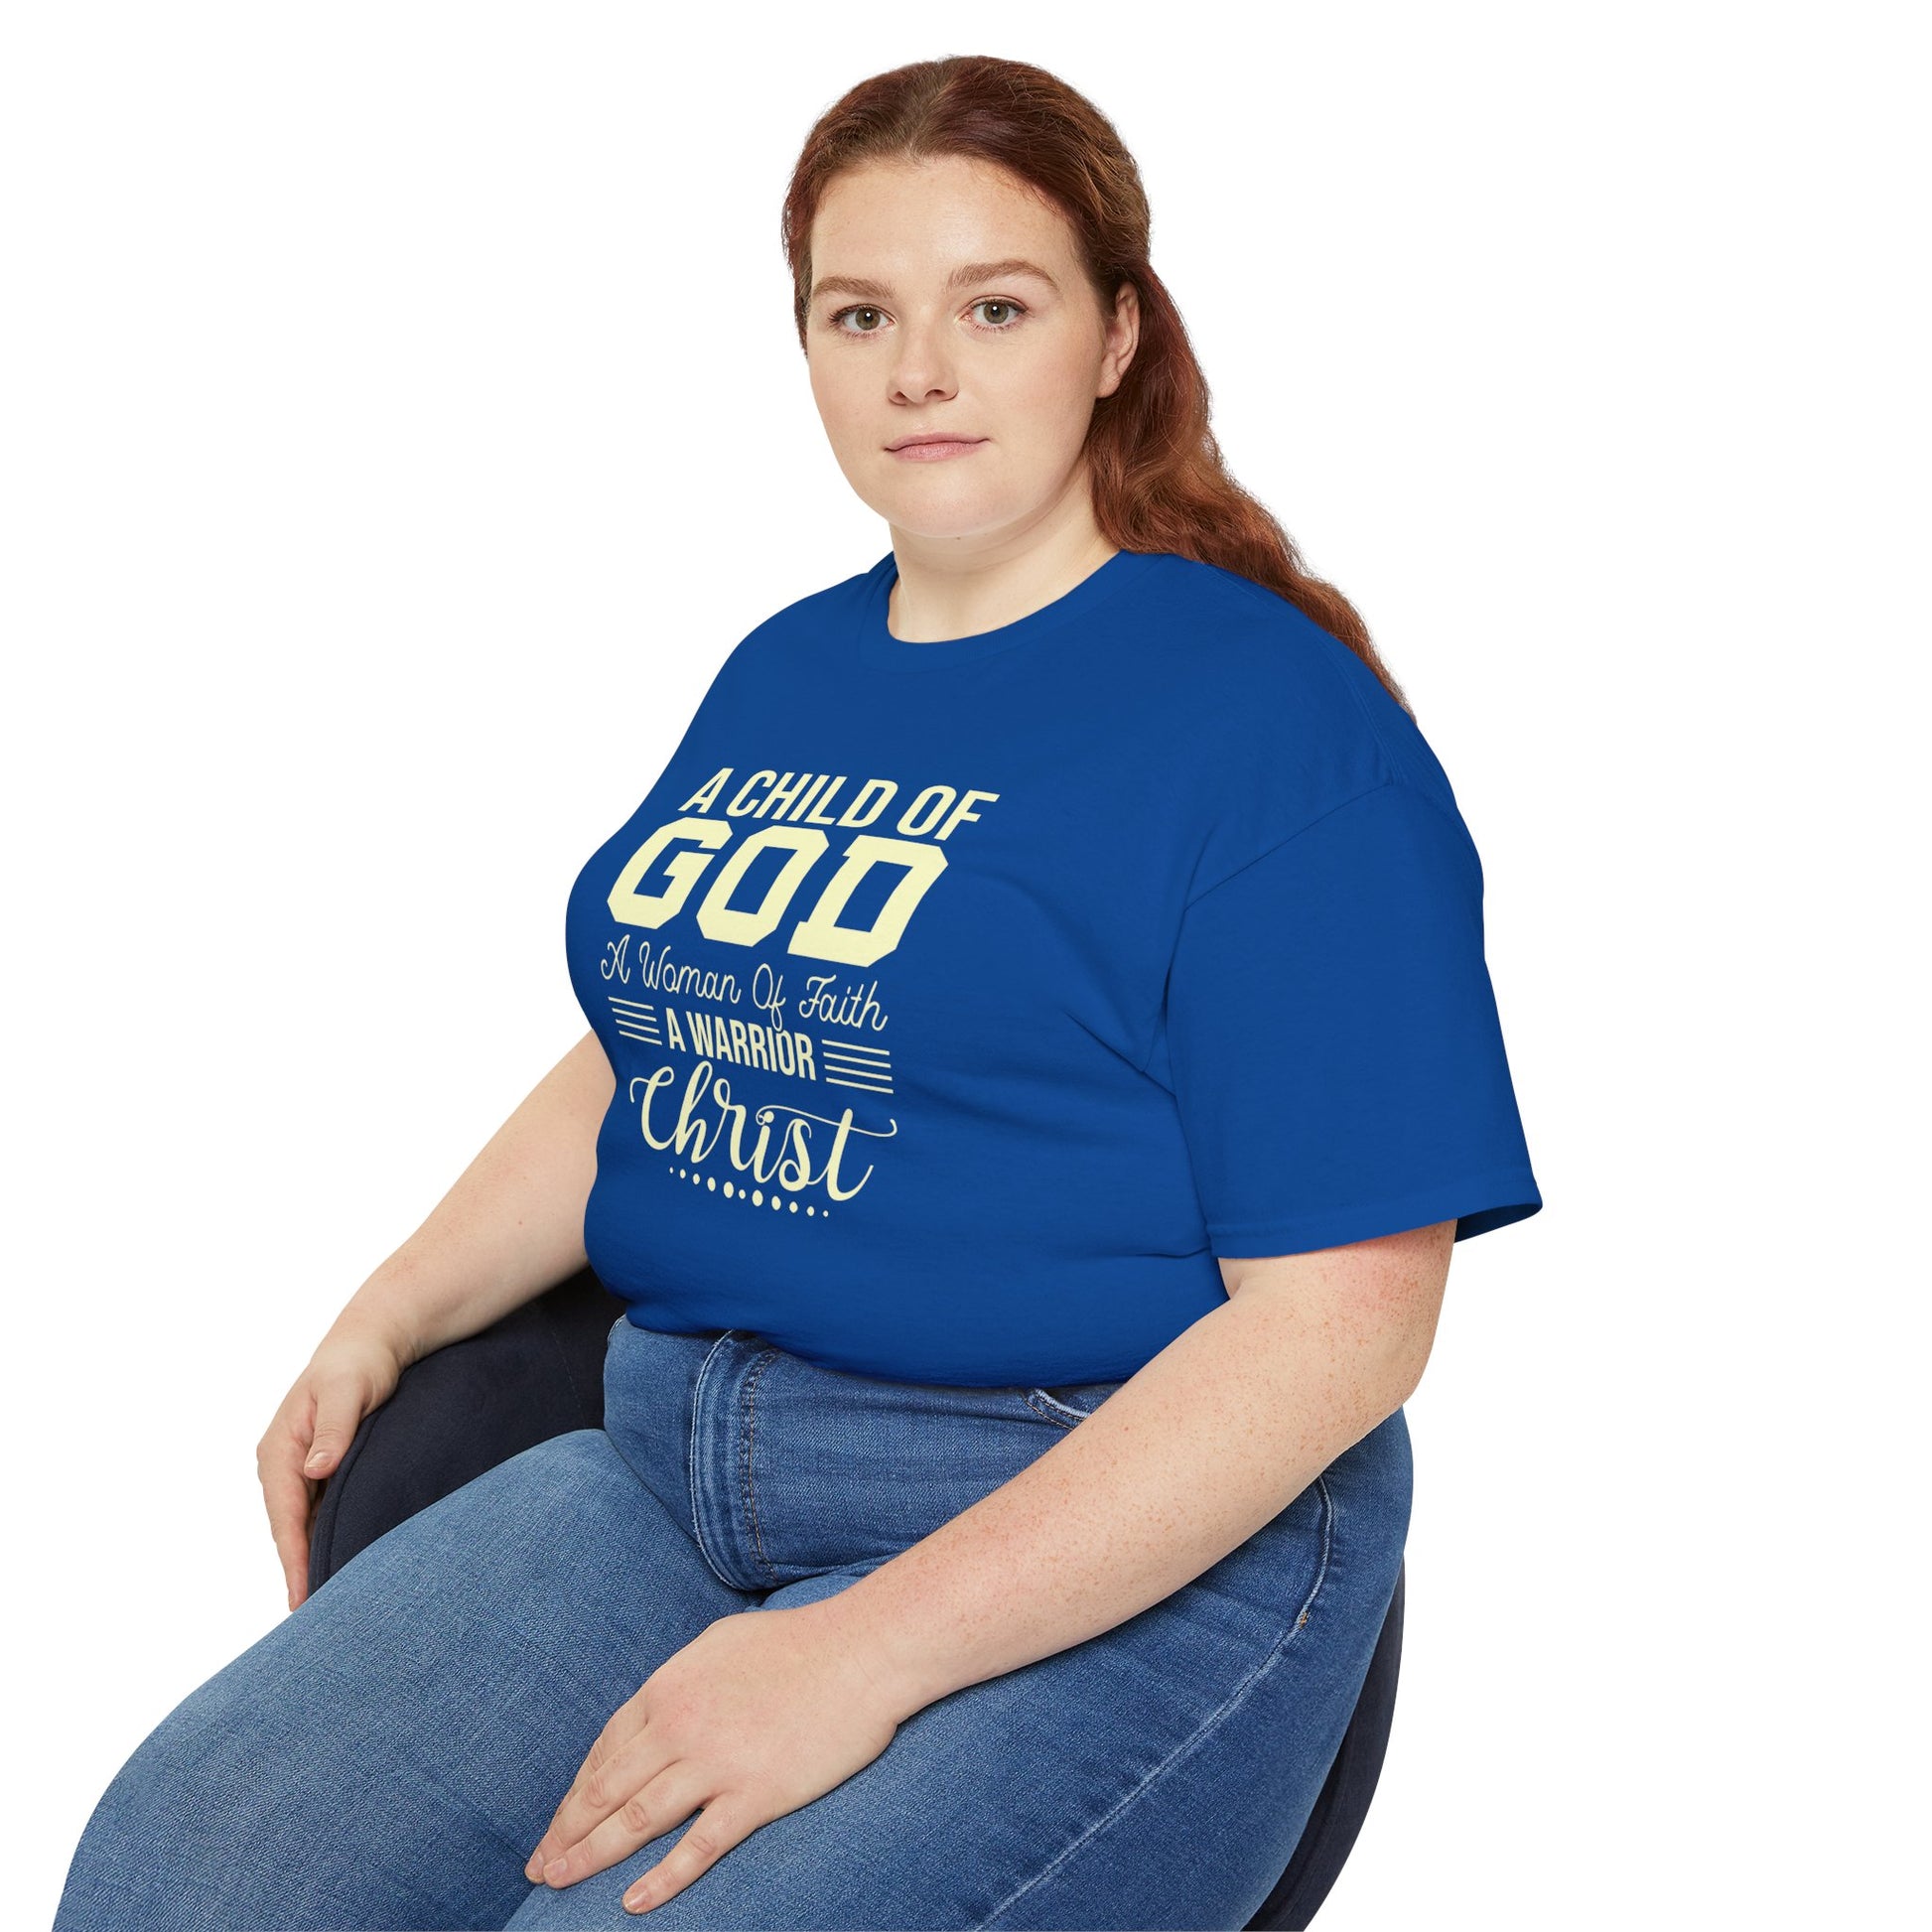 A Child Of God A Woman Of Faith A Warrior Of Christ Women's Christian Ultra Cotton Tee Printify